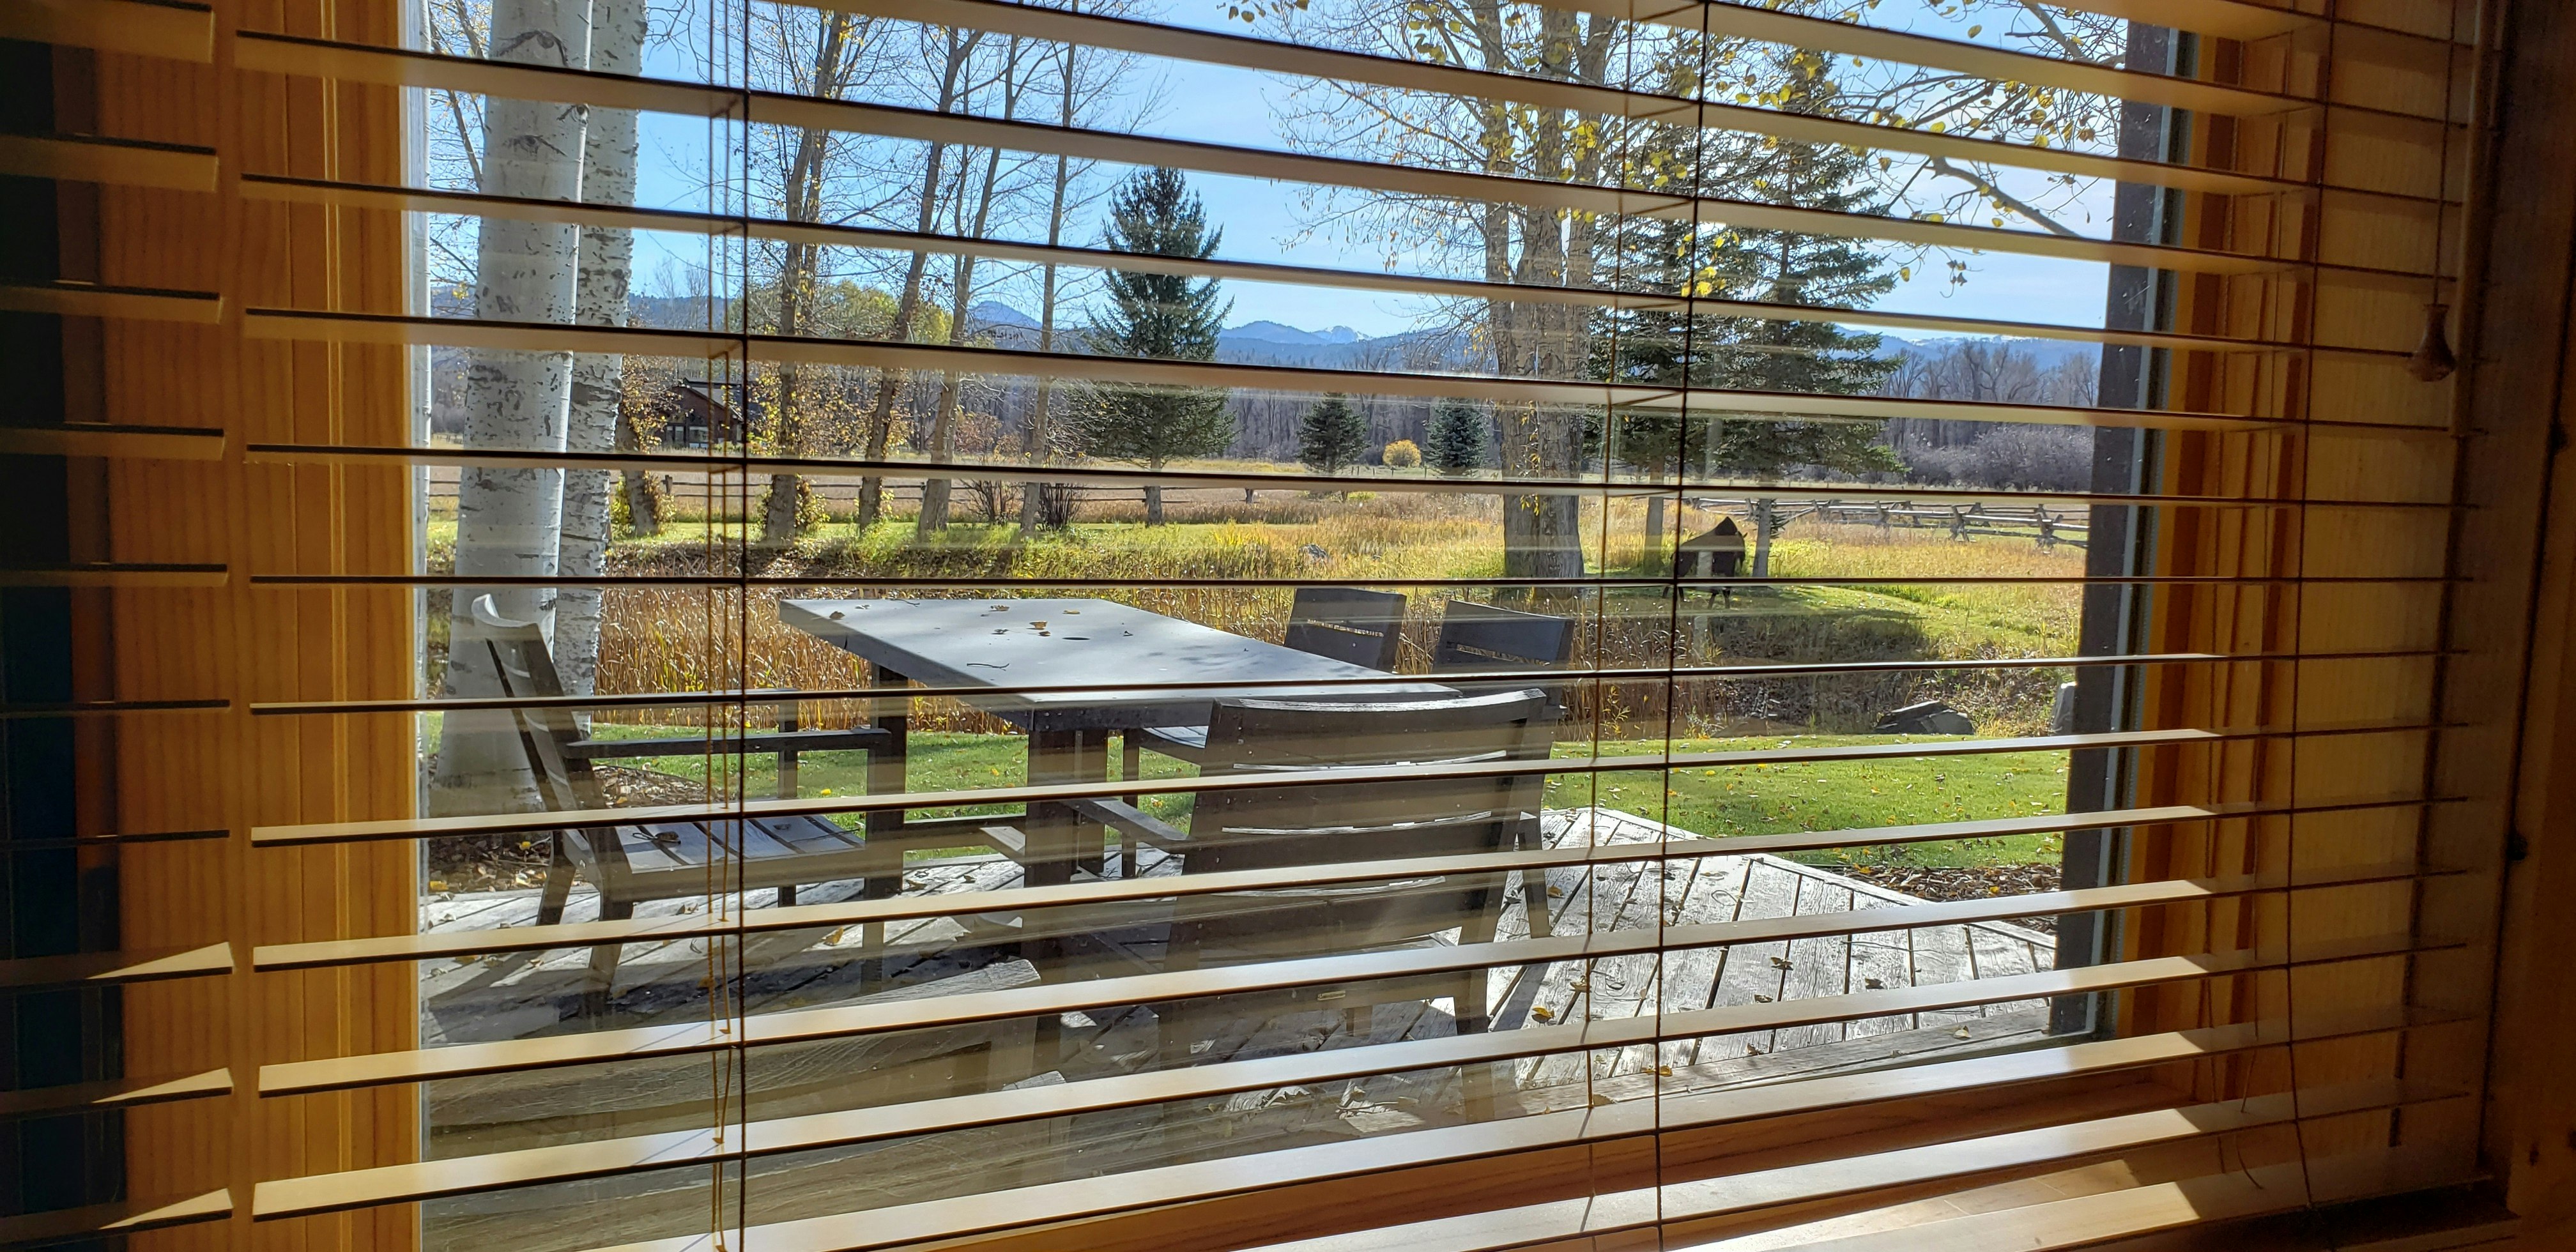 All of the windows at the Western Star Ranch's cabin offer fantastic views.